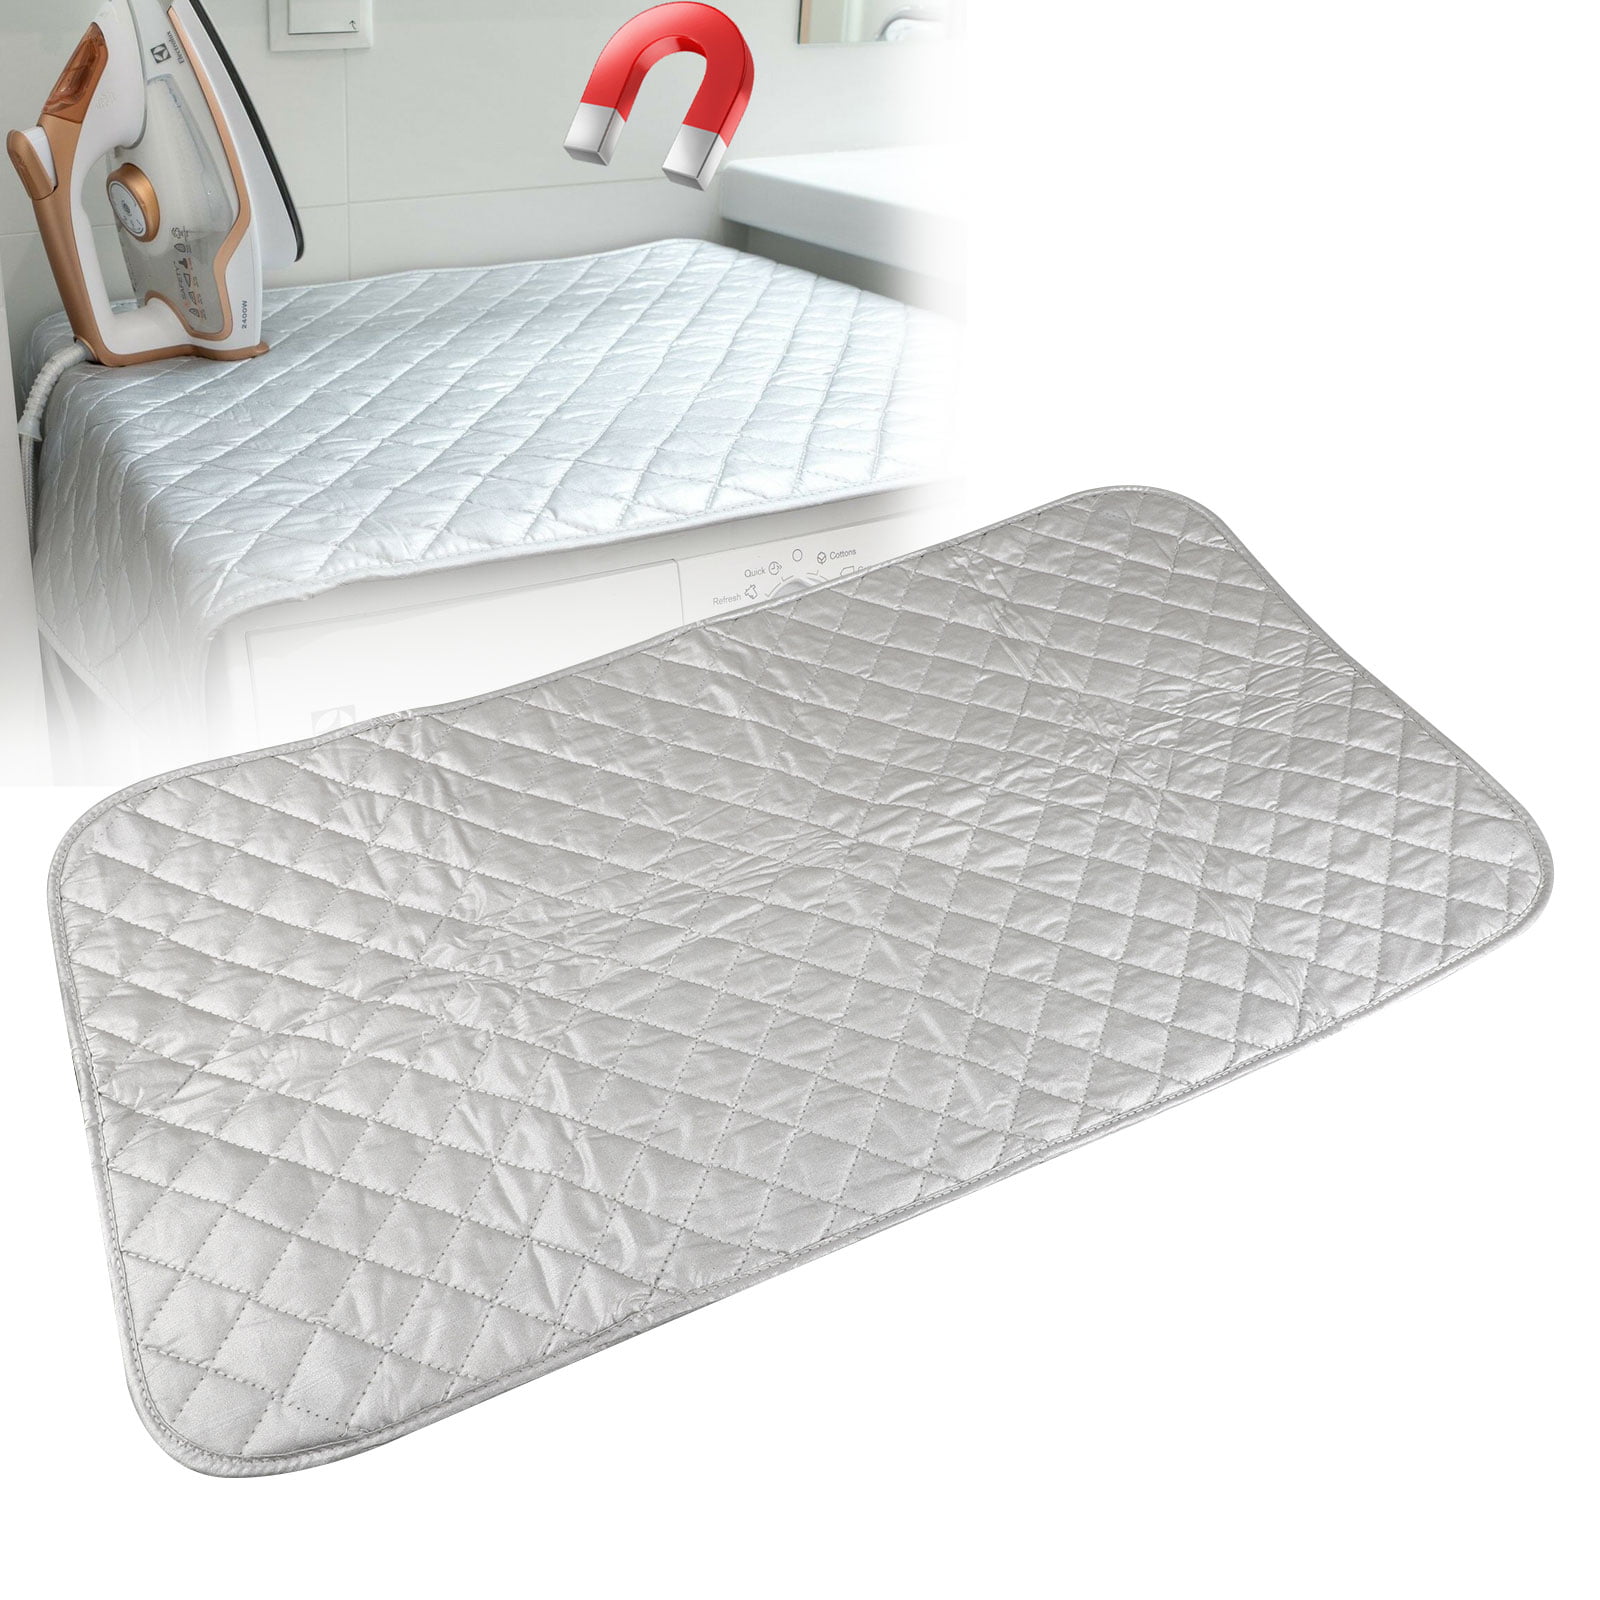 Heat Resistant Ironing Mat Laundry Pad Washer Dryer Board-Mat-Portable Cove I0Y9 